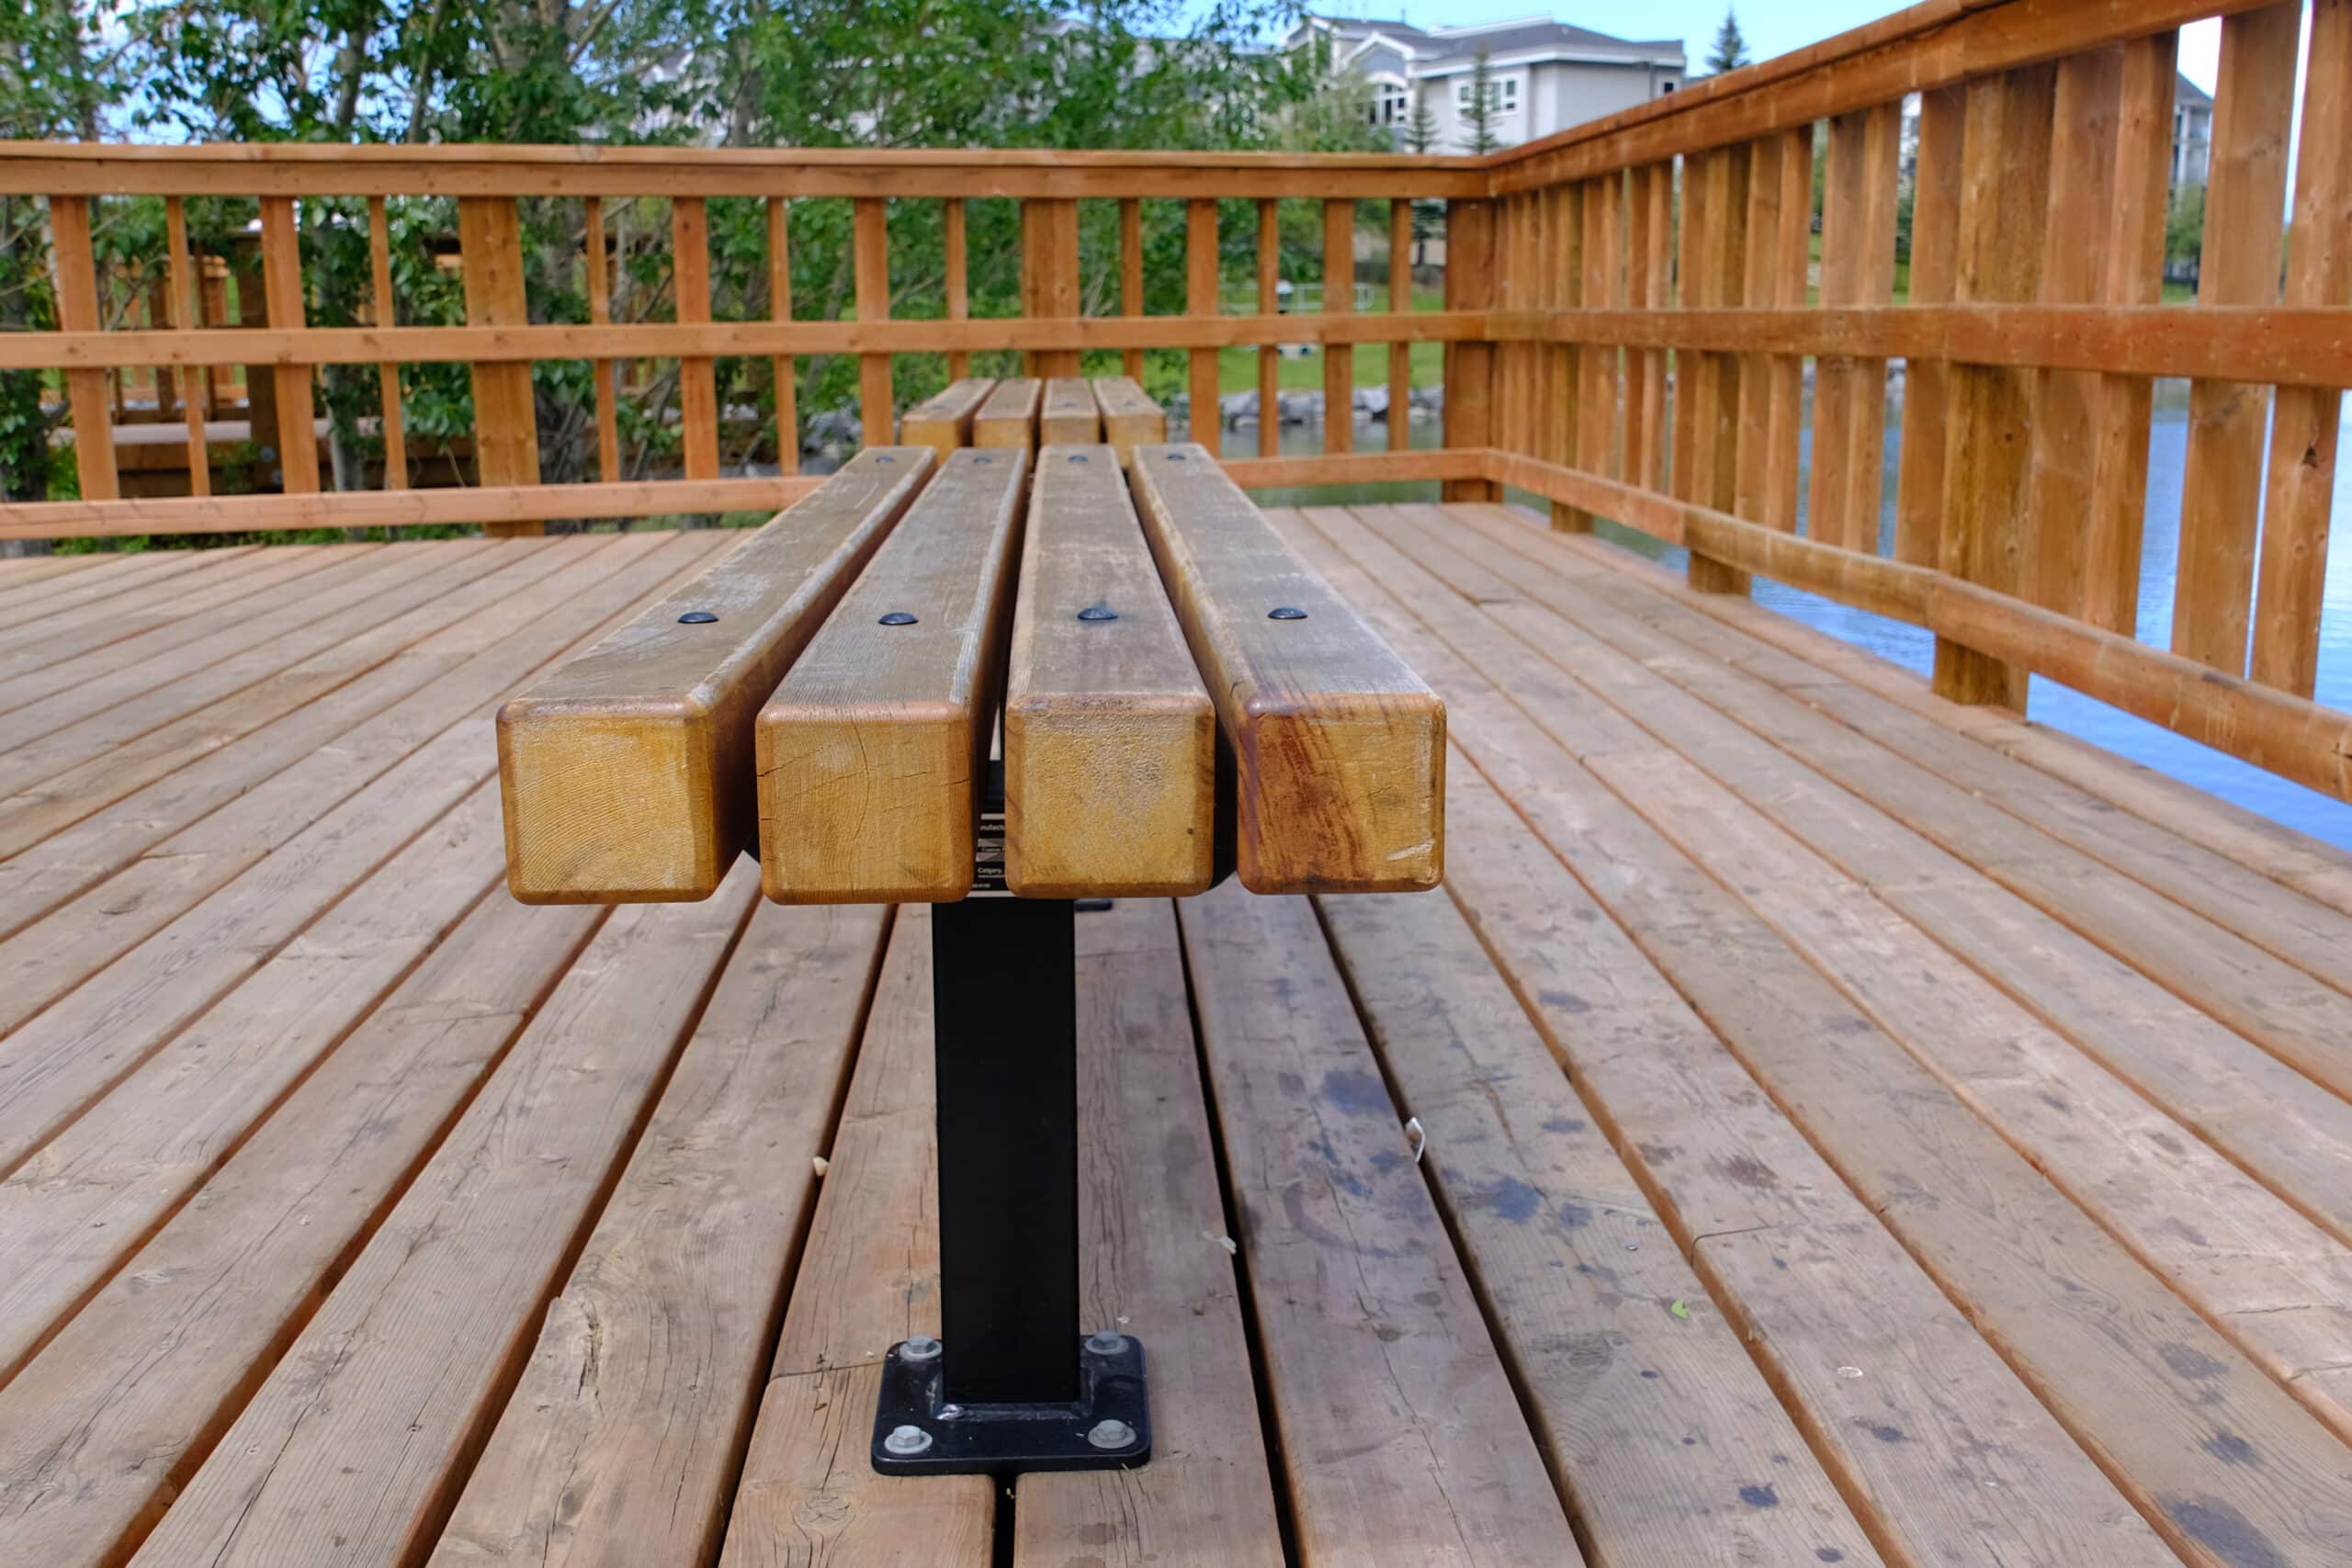 How does a new deck raise your home’s resale value?